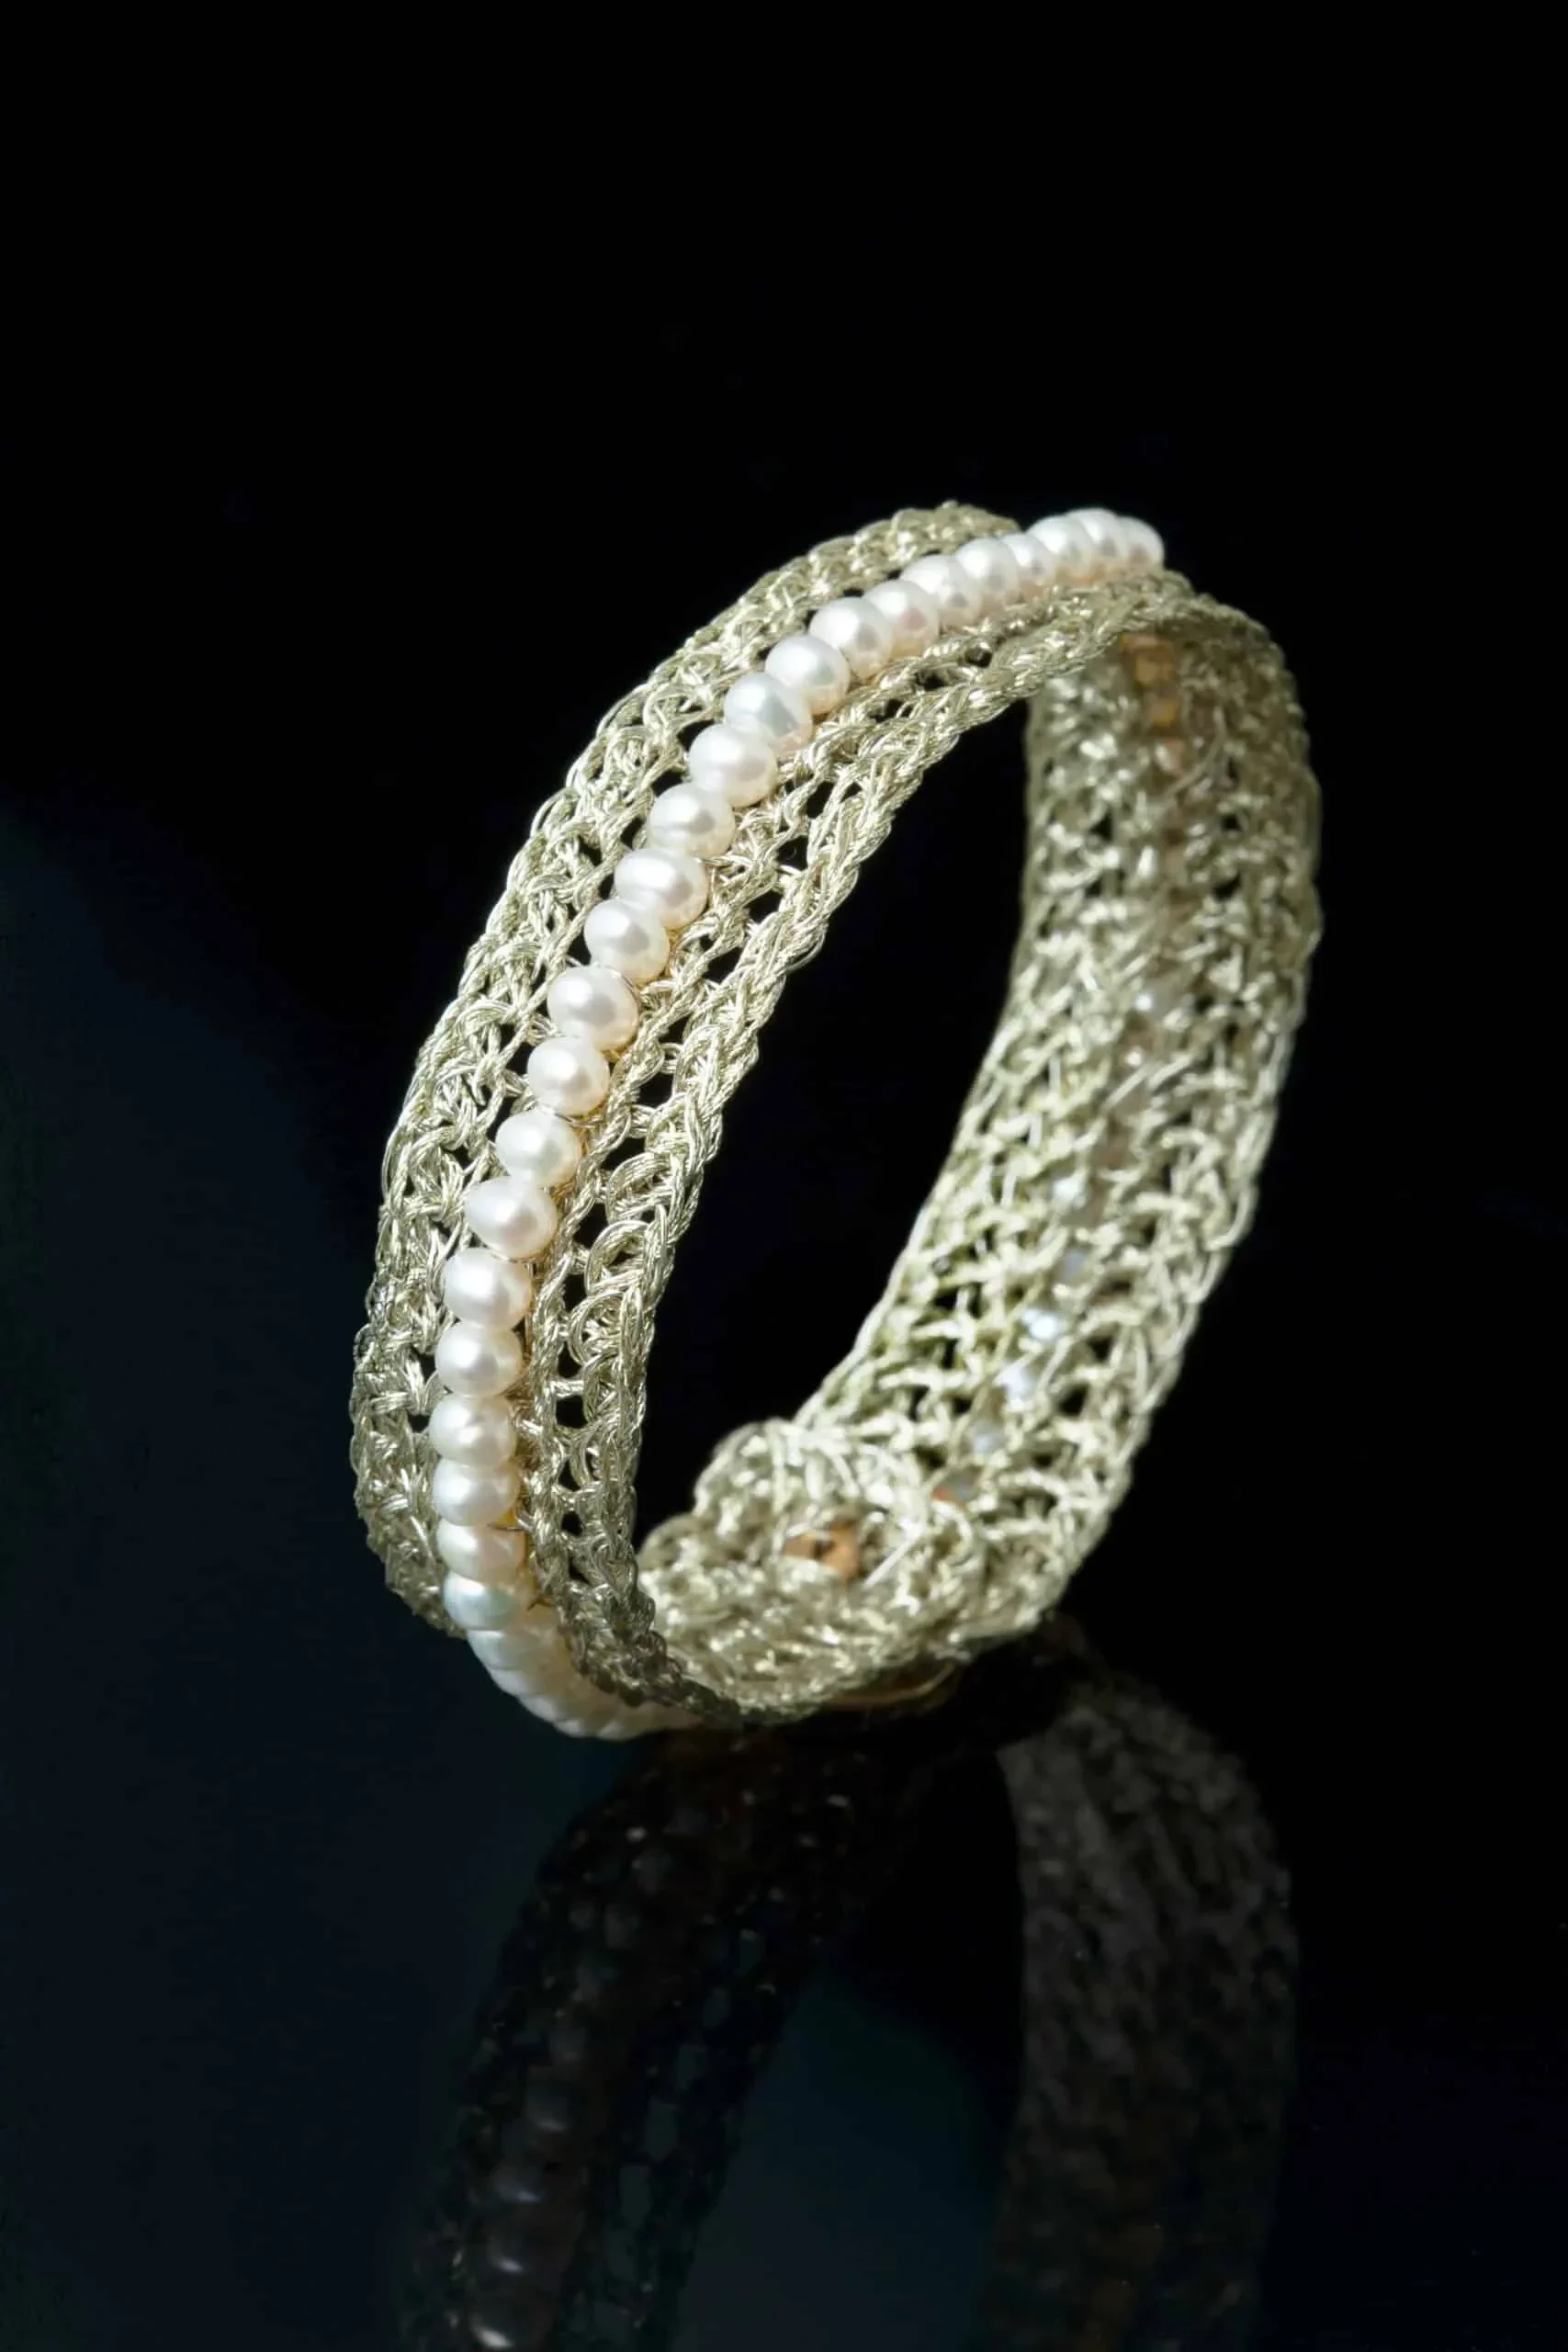 Handmade Jewellery | Crochet knit silver bracelet with and pearls gallery 1